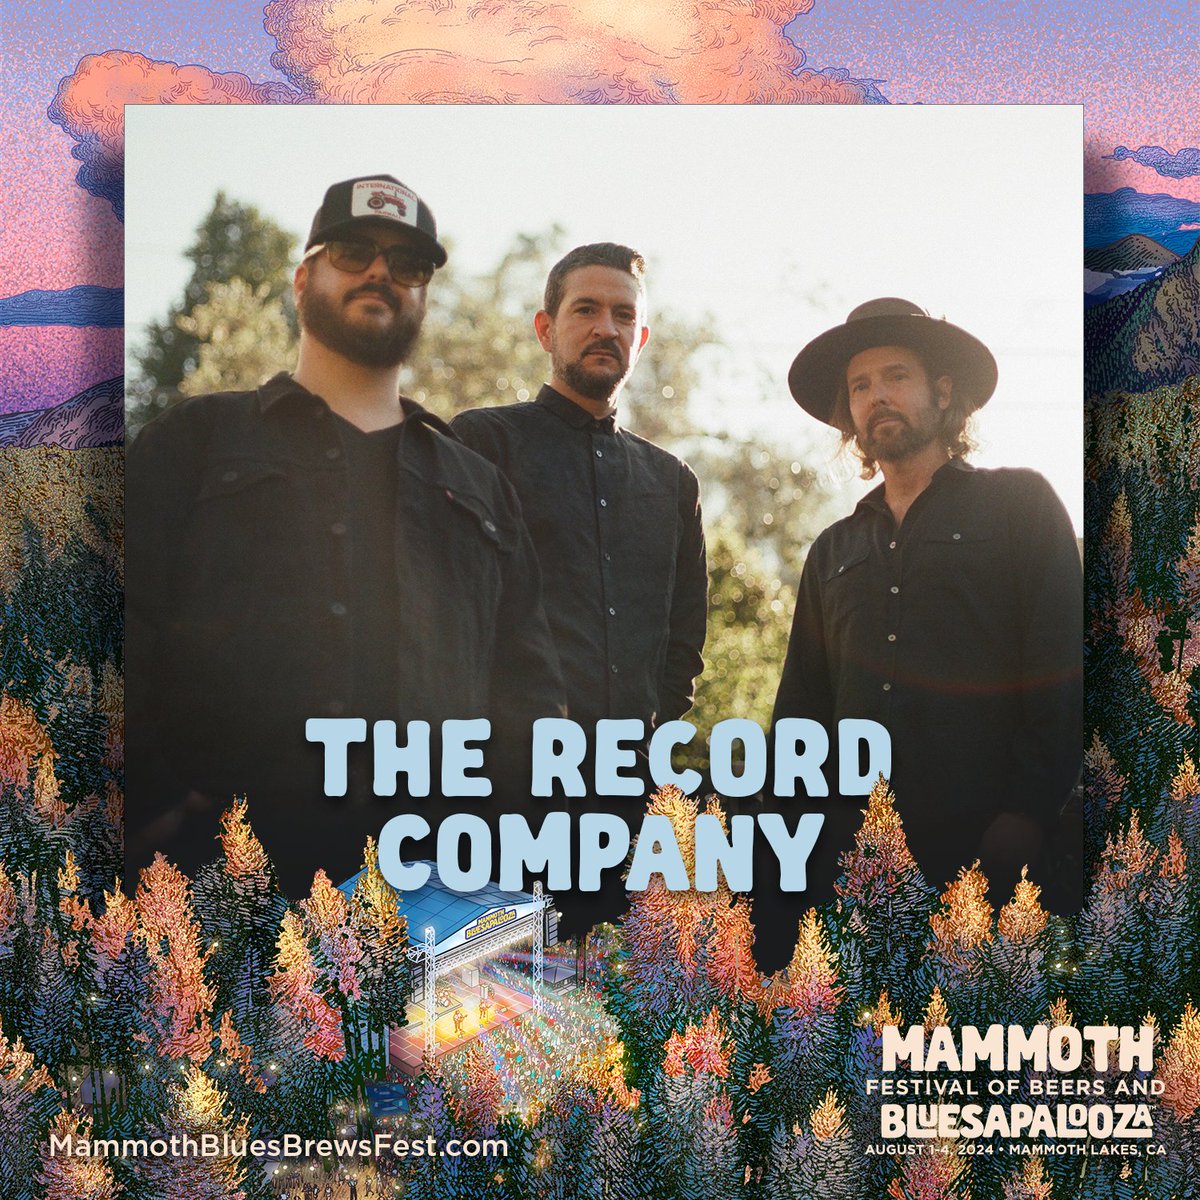 We'll be performing at this year's @Bluesapalooza in Mammoth Lakes, CA. The festival is happening from August 1 - 4, learn more using the link below. tickets.mammothbluesbrewsfest.com/e/mammoth-blue…